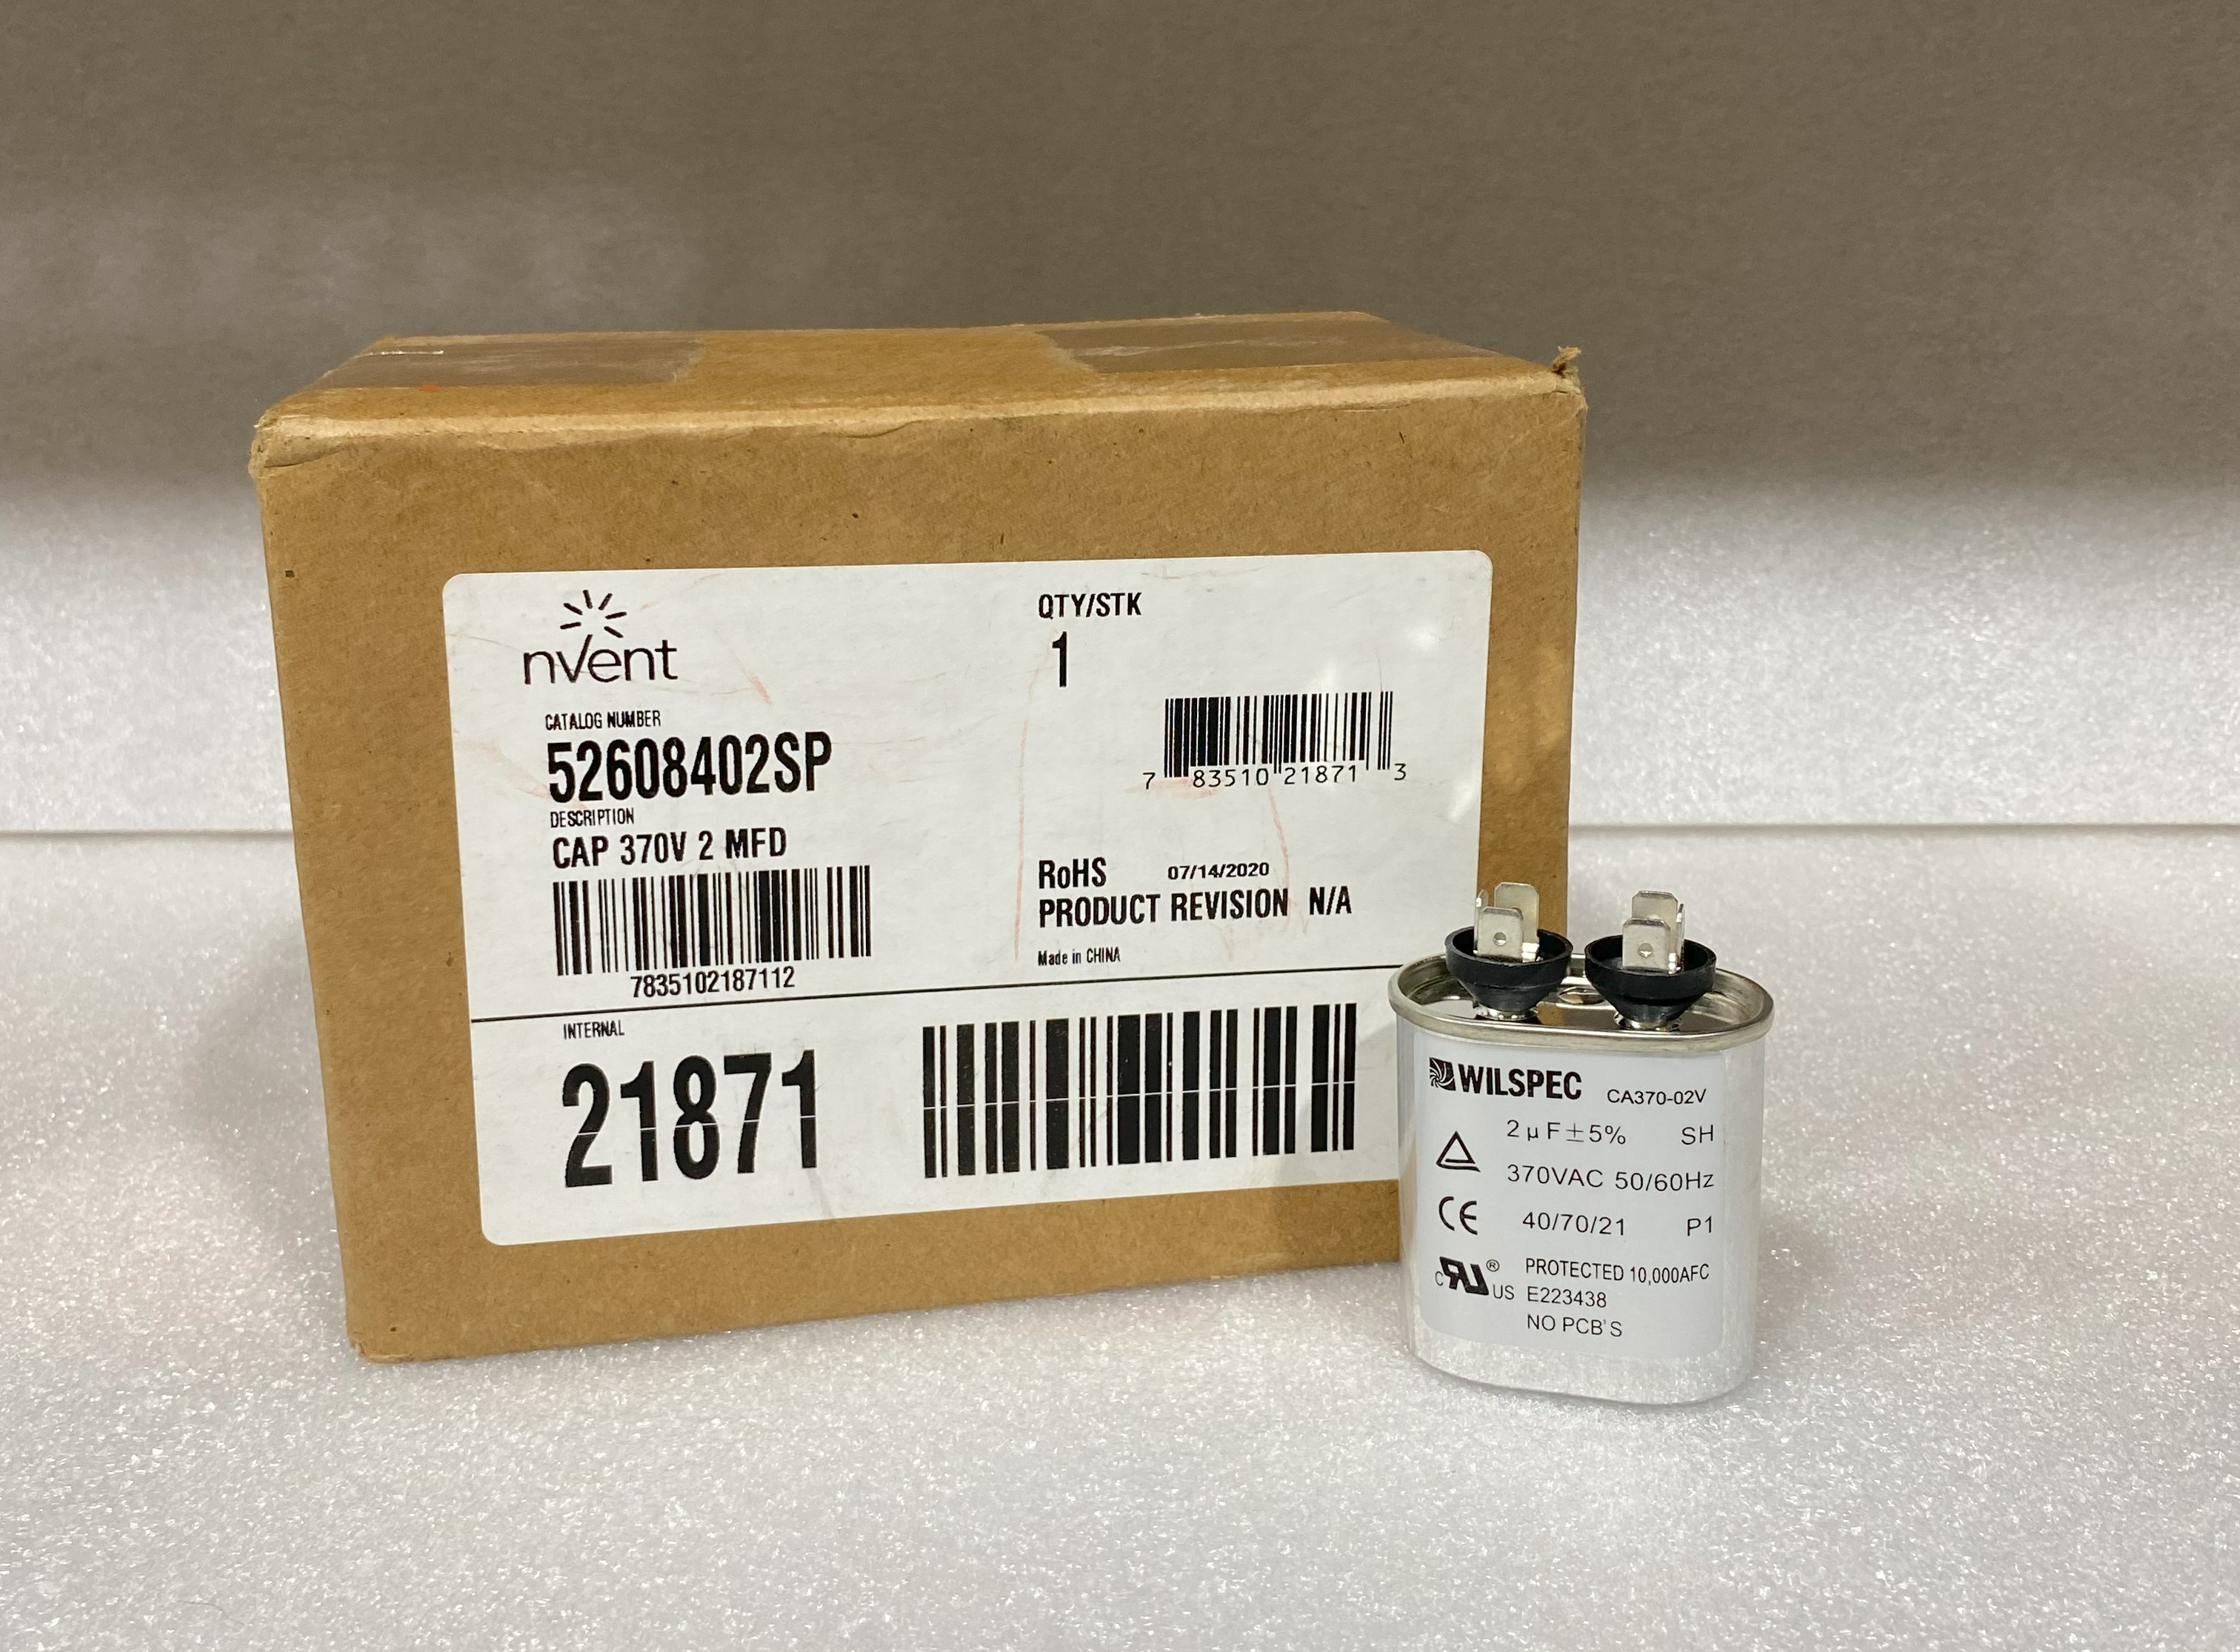 nVent 52608402SP Blower Capacitor